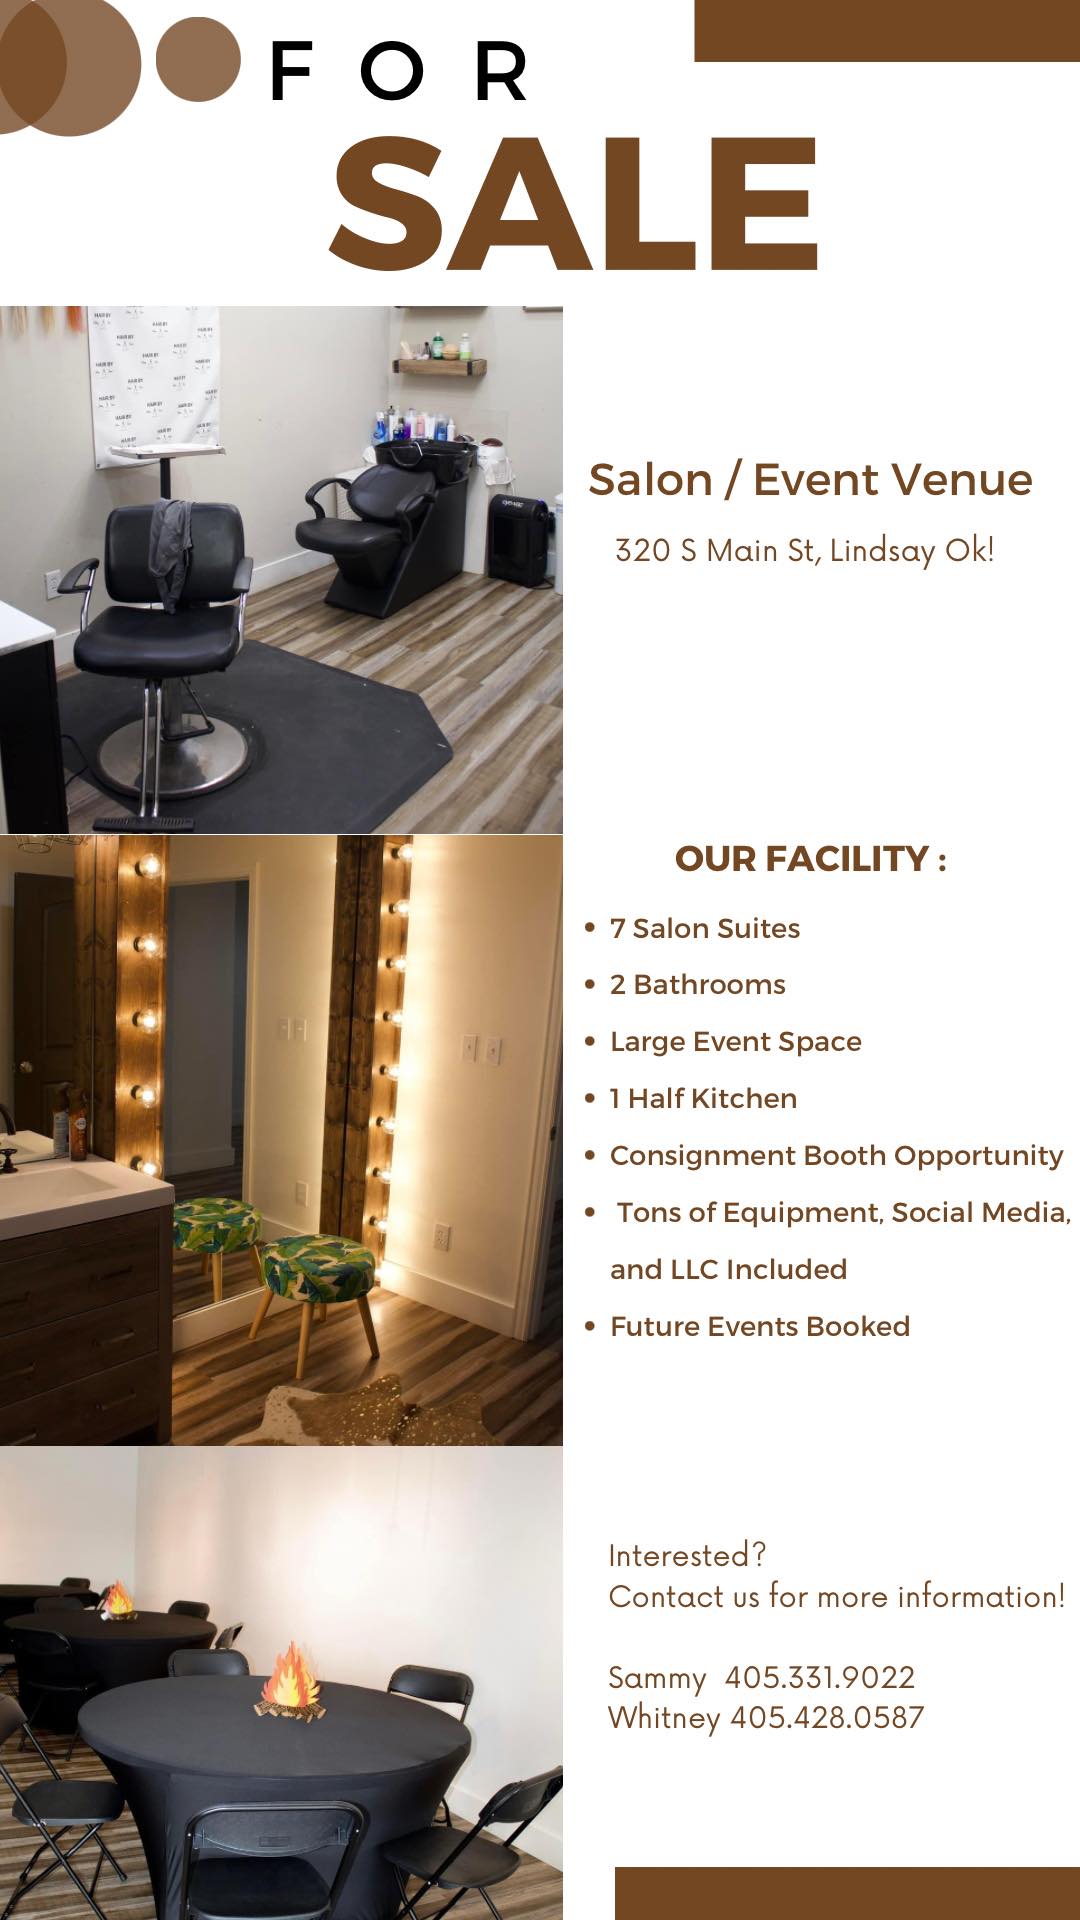 The Main Event and Beauty Bar